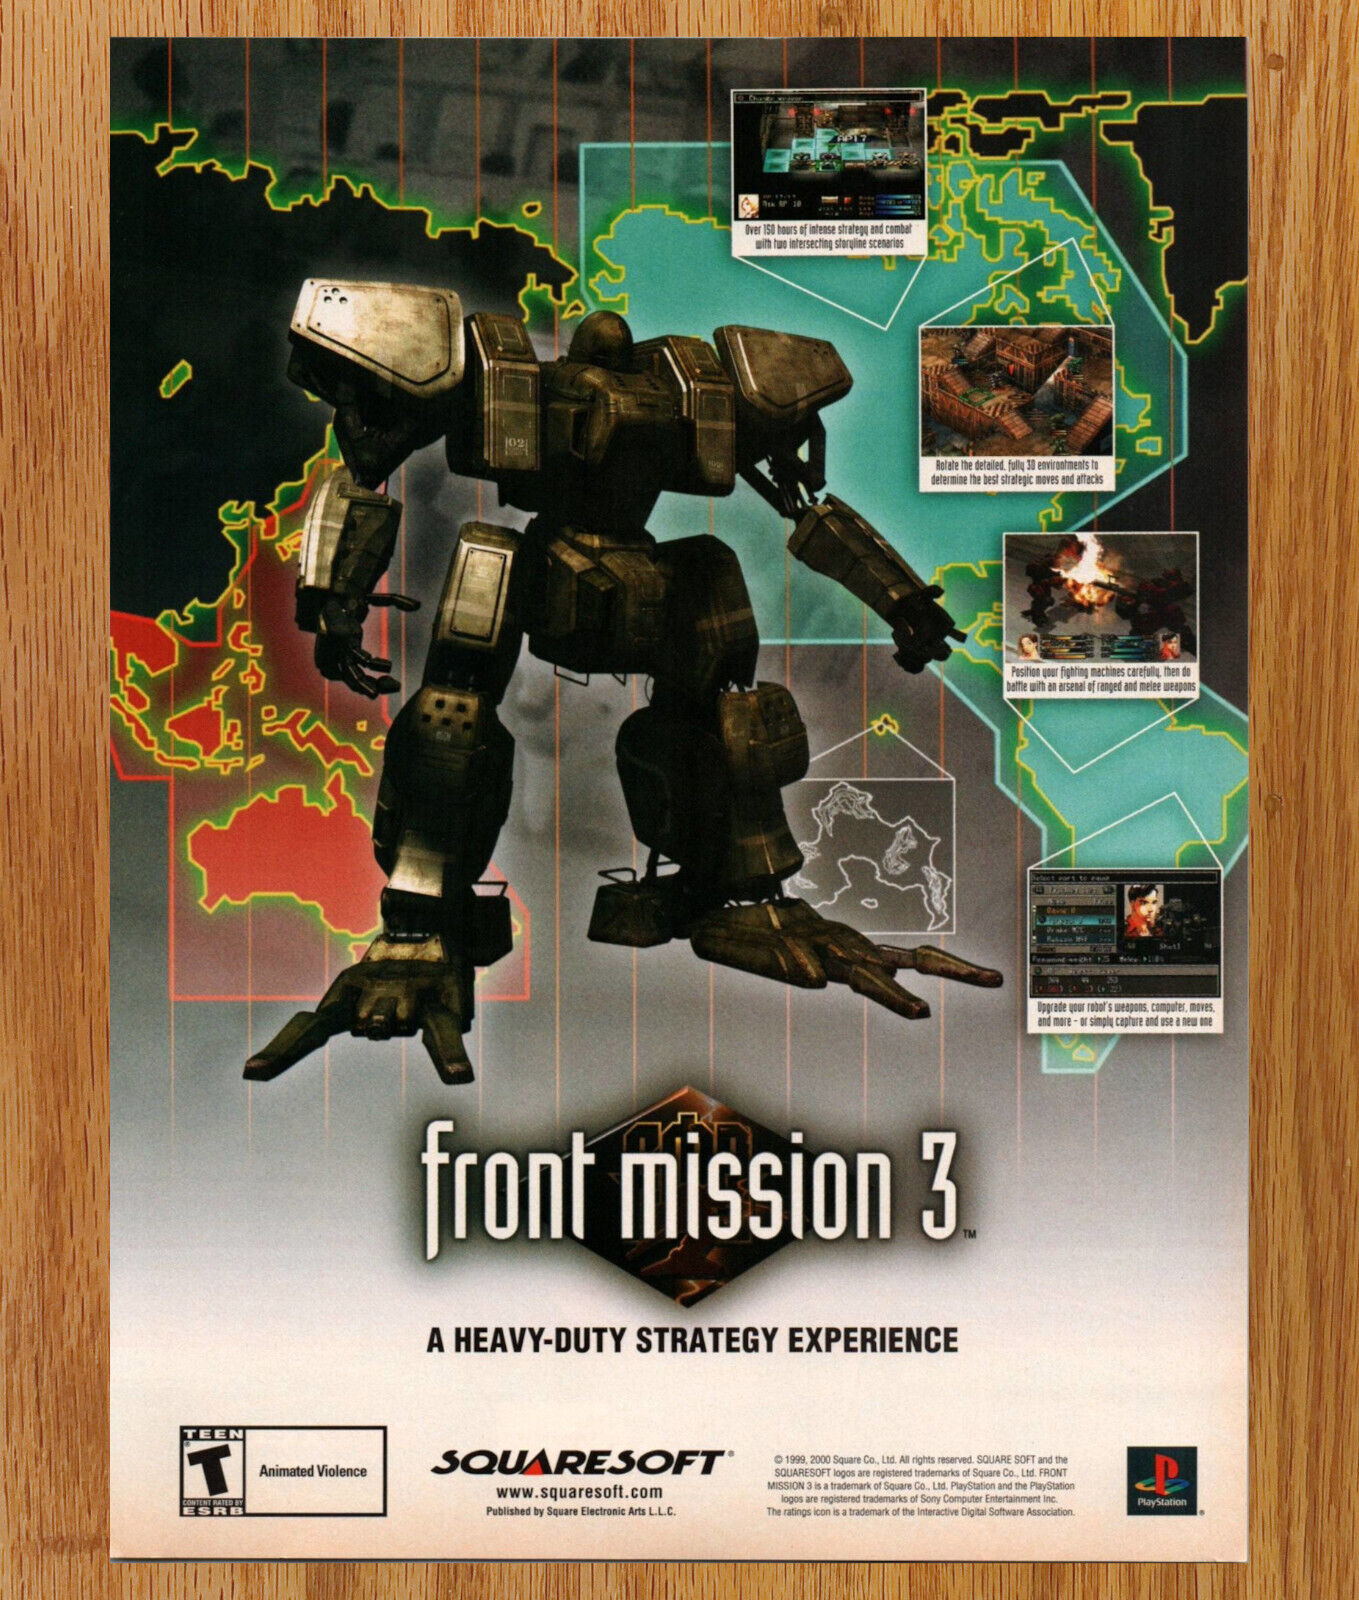 Front Mission 3 Squaresoft Tactical RPG - Video Game Print Ad Poster Promo 2000